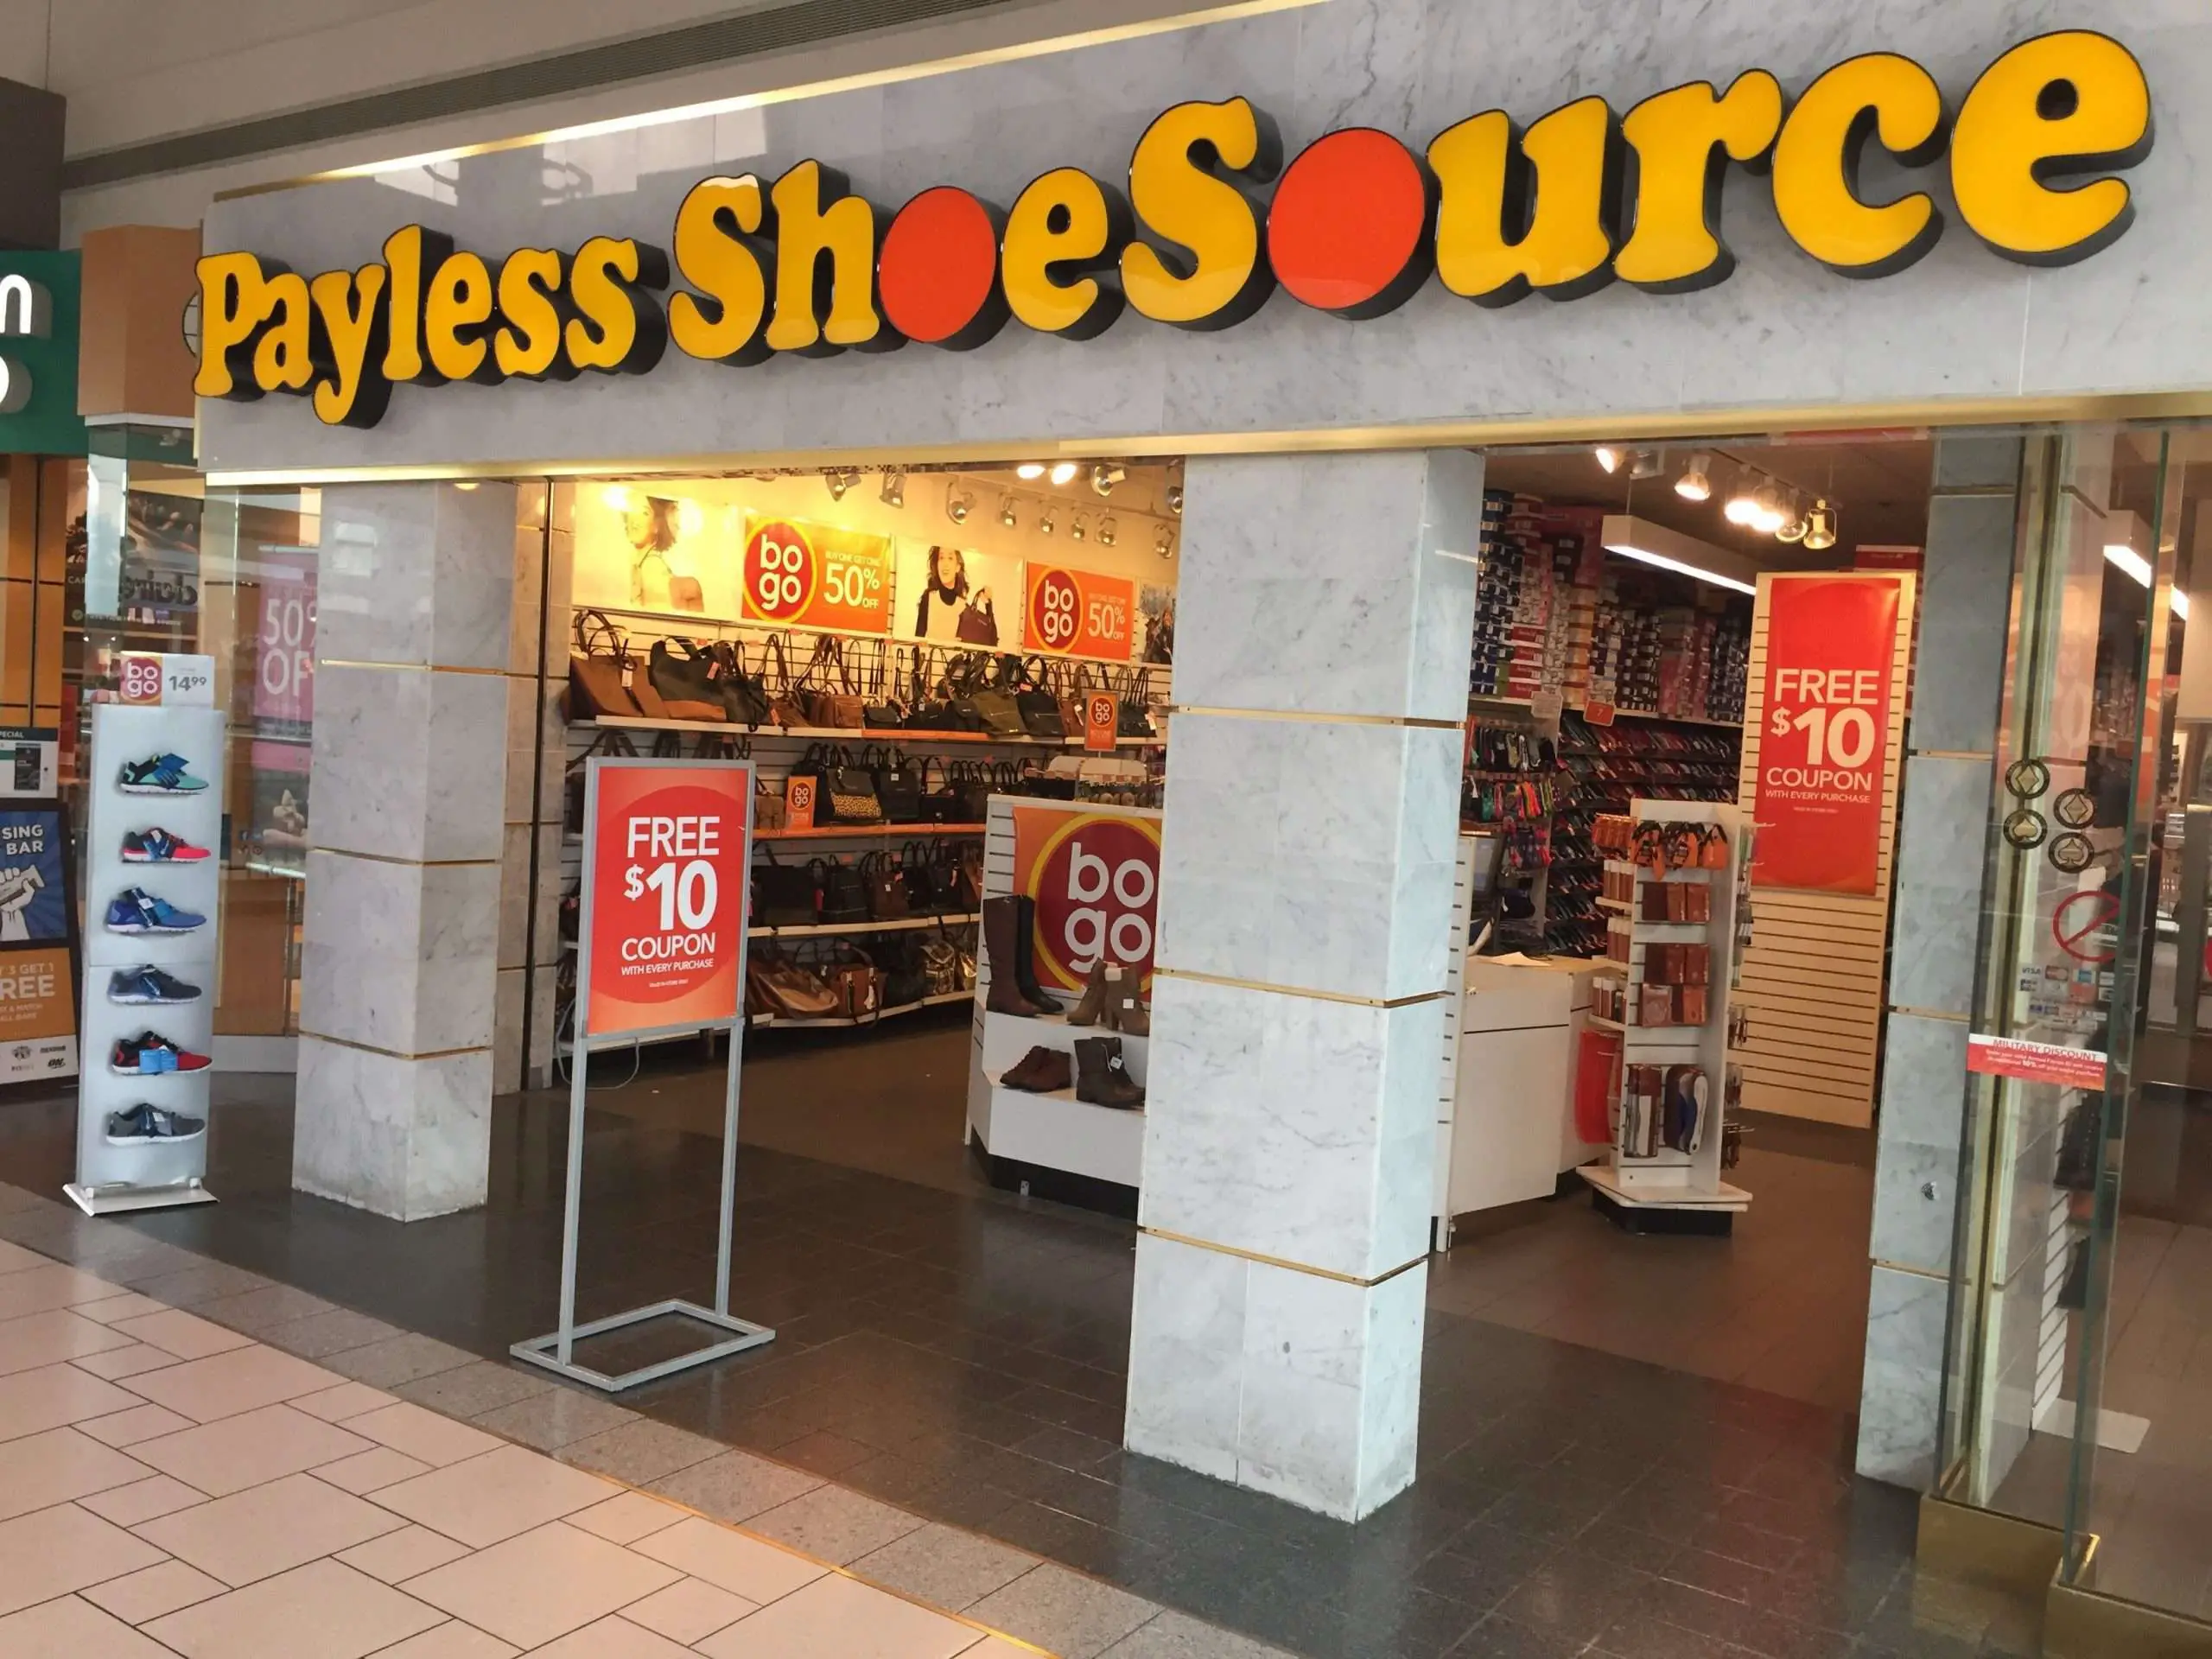 Payless ShoeSource set to close all remaining stores, report says